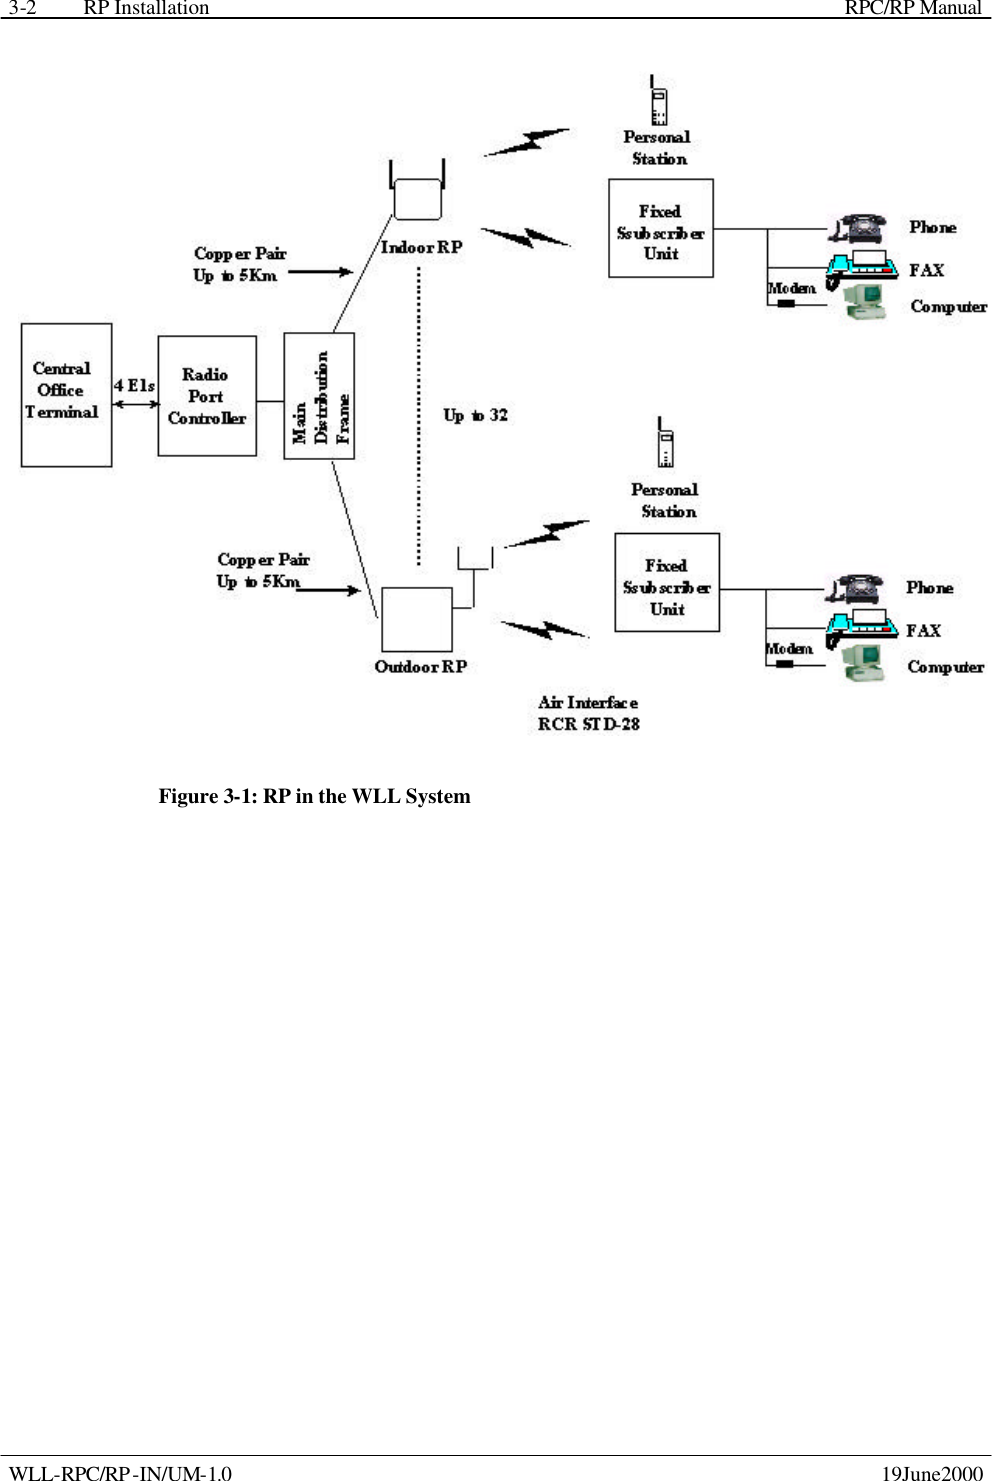 RP Installation    RPC/RP Manual WLL-RPC/RP-IN/UM-1.0    19June2000 3-2 Figure 3-1: RP in the WLL System 